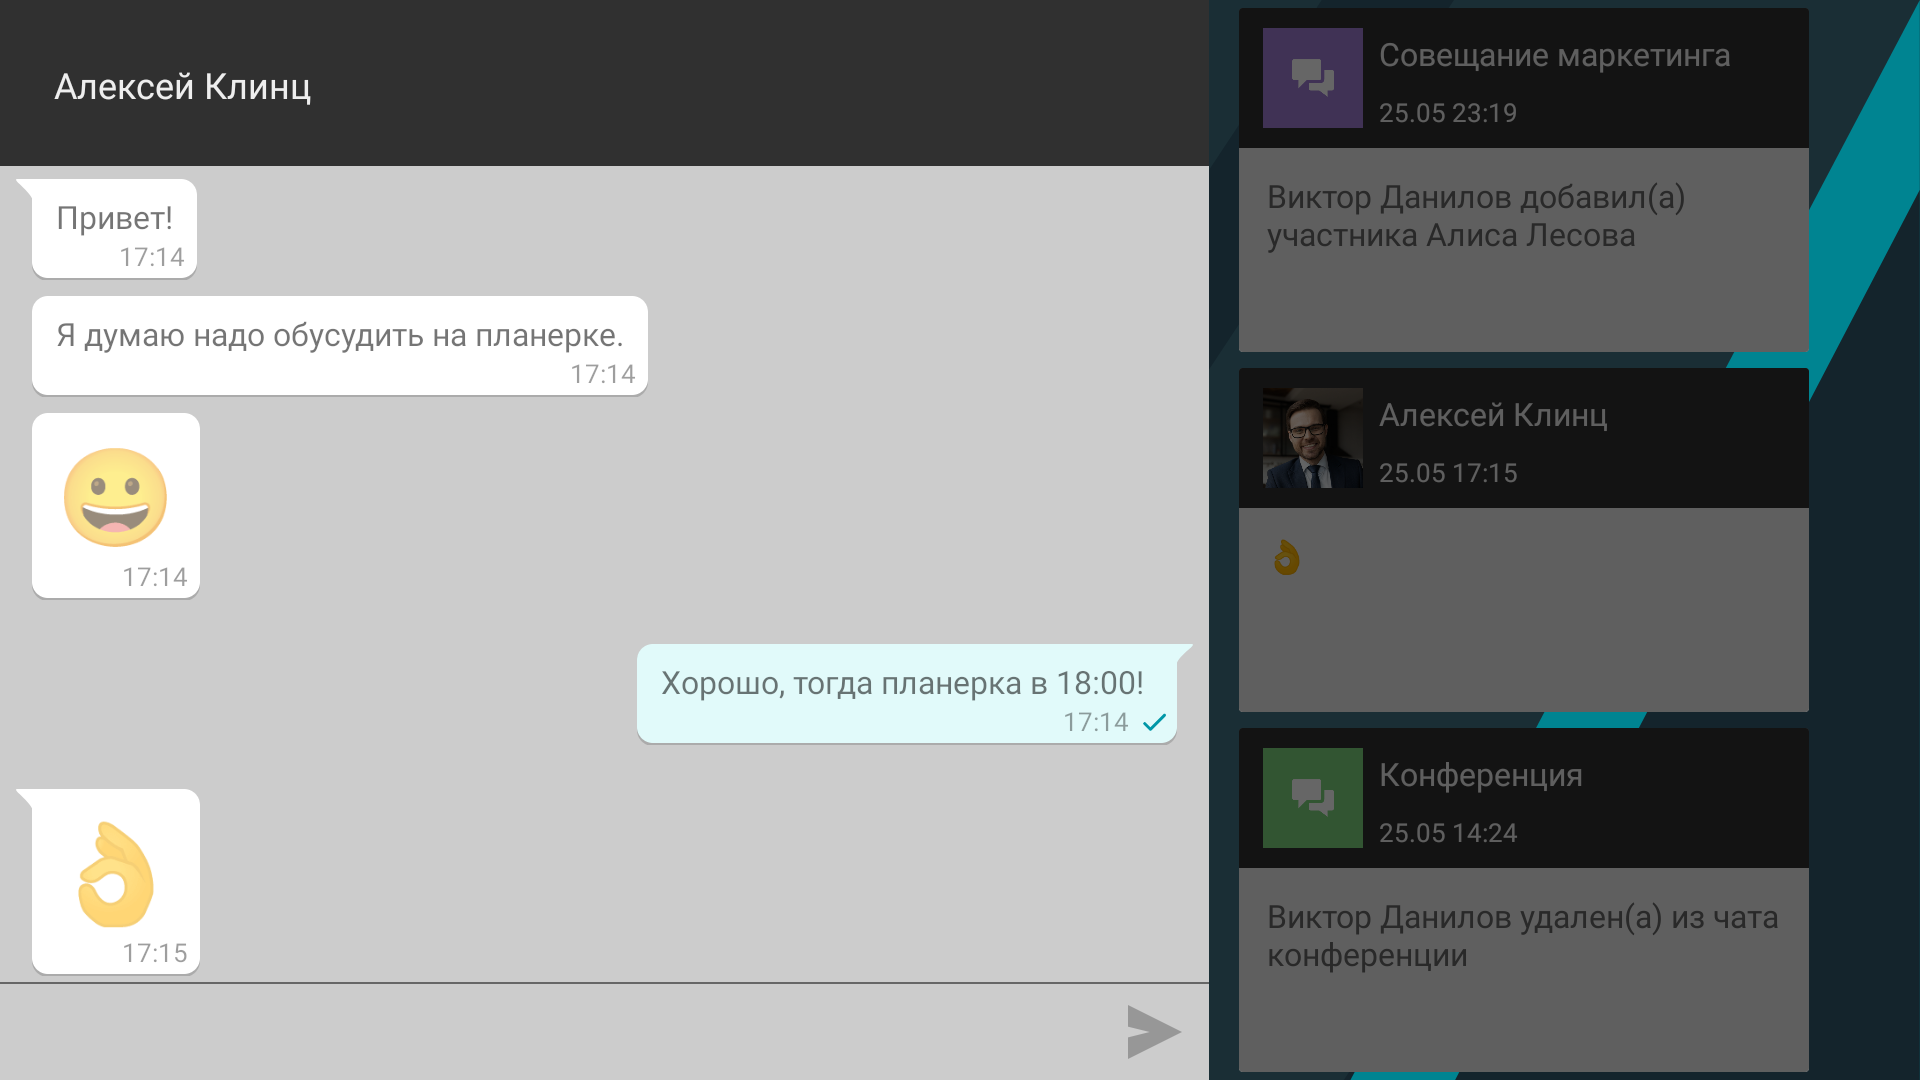 /client-android-tv/media/chat/ru.png